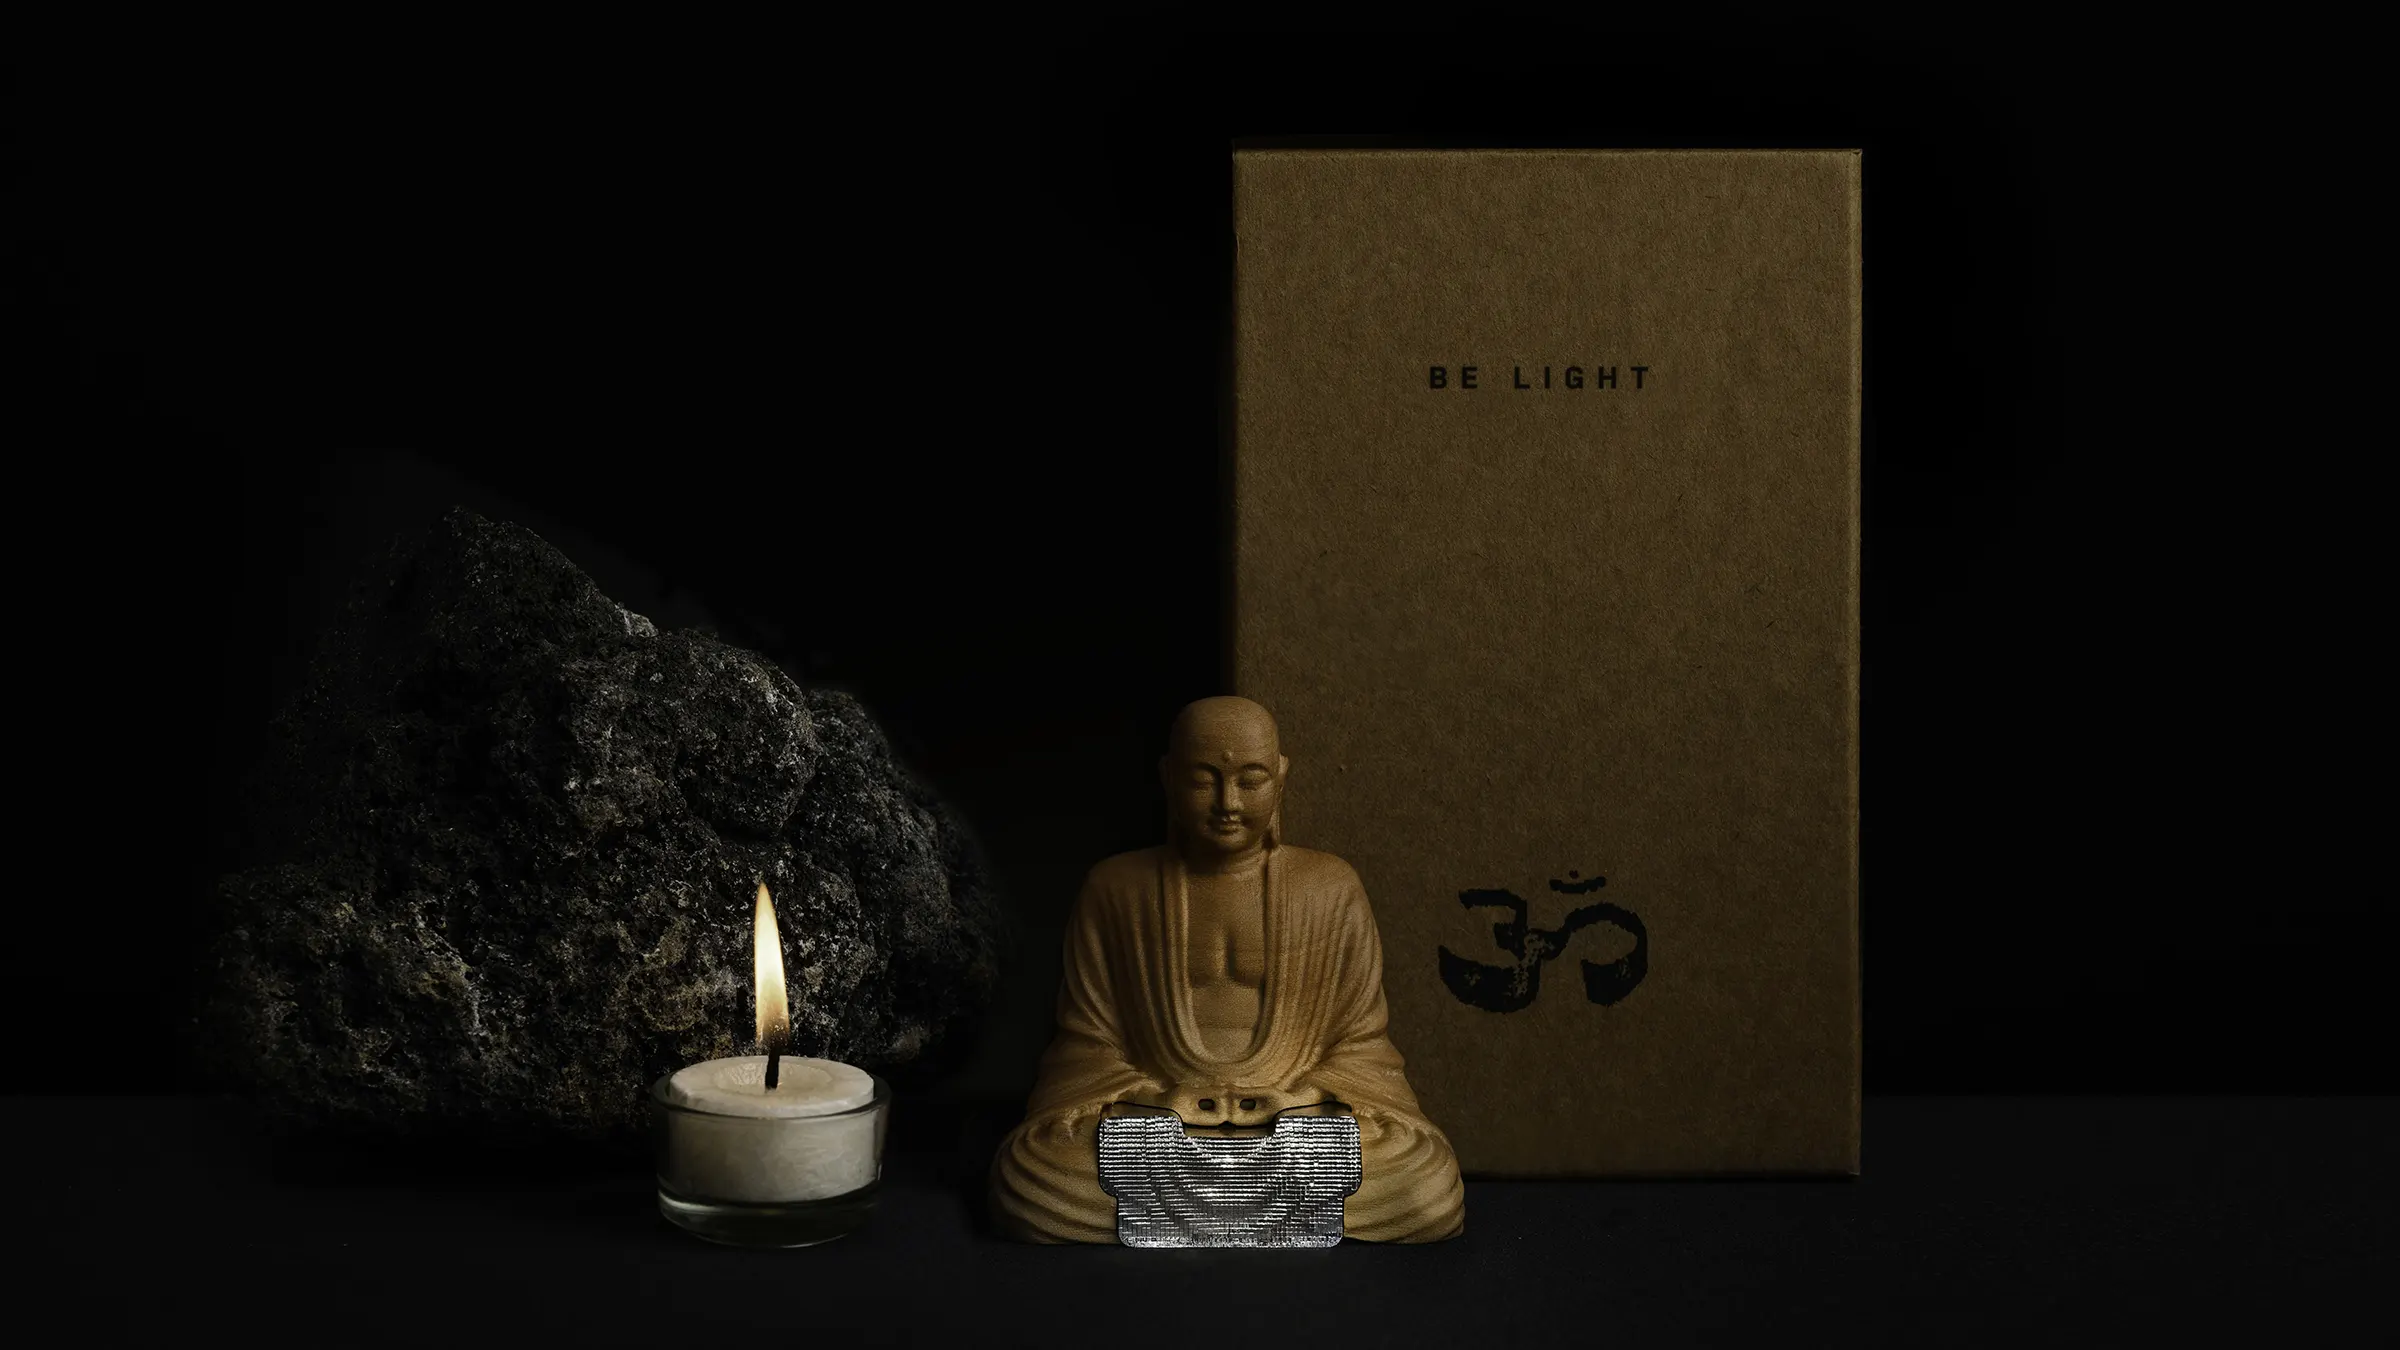 The Buddha figure and candle together with its packeing box and a stone.